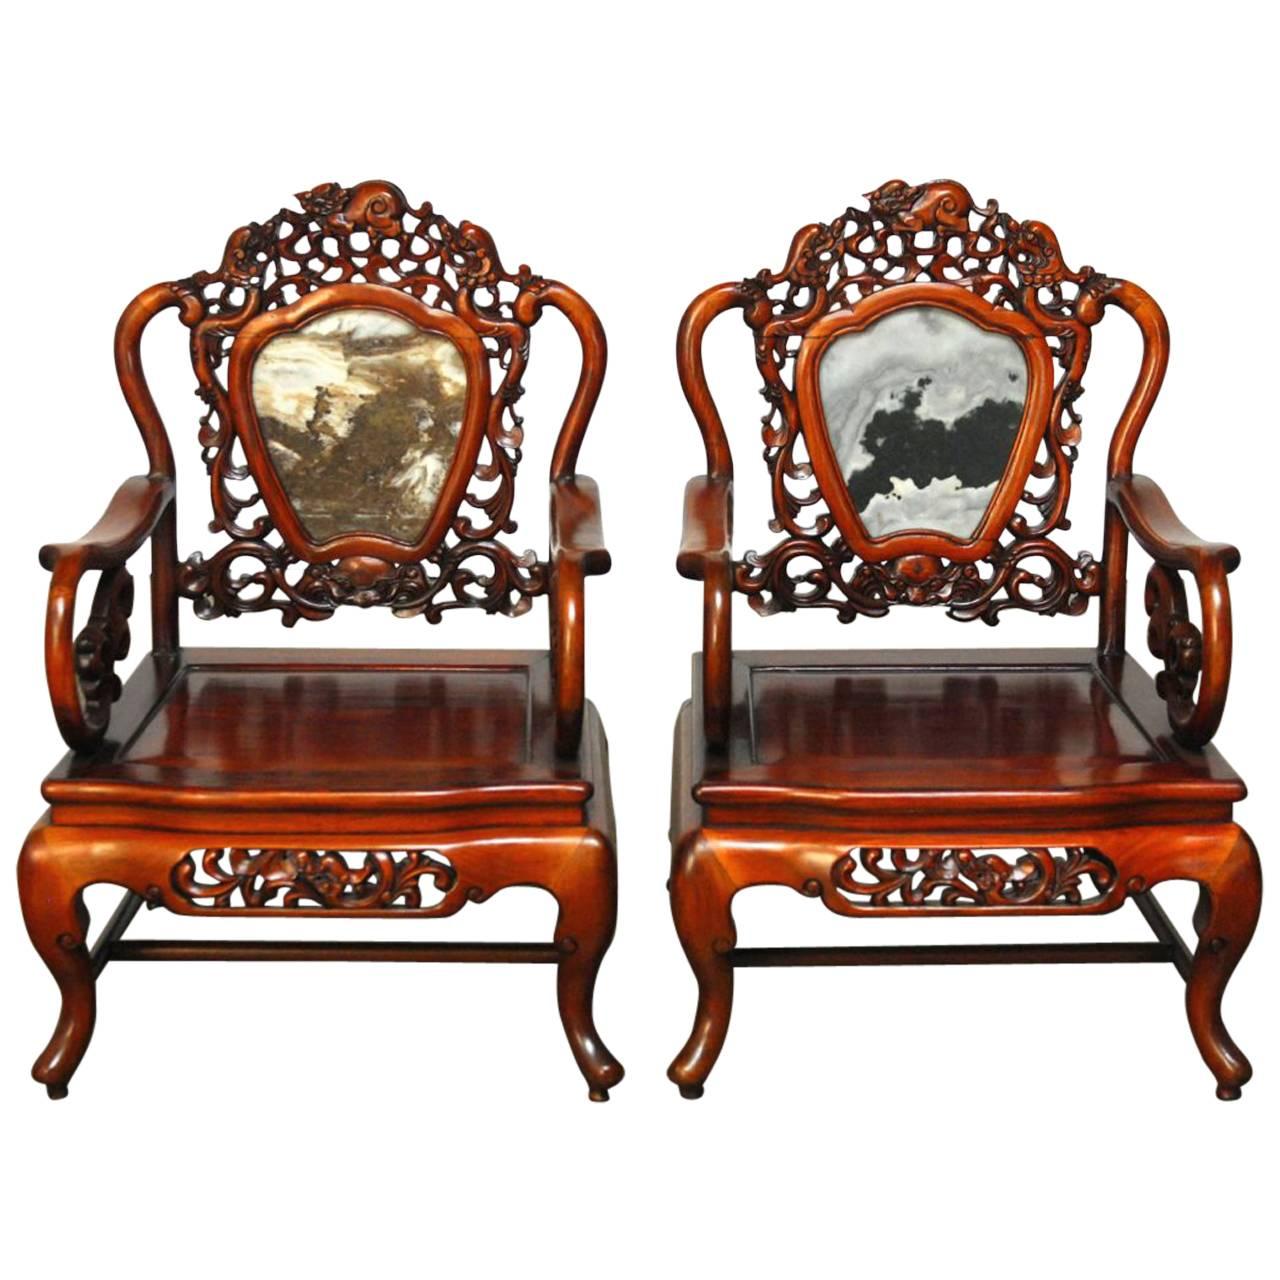 Pair of Chinese Rosewood and Marble Dali Carved Armchairs